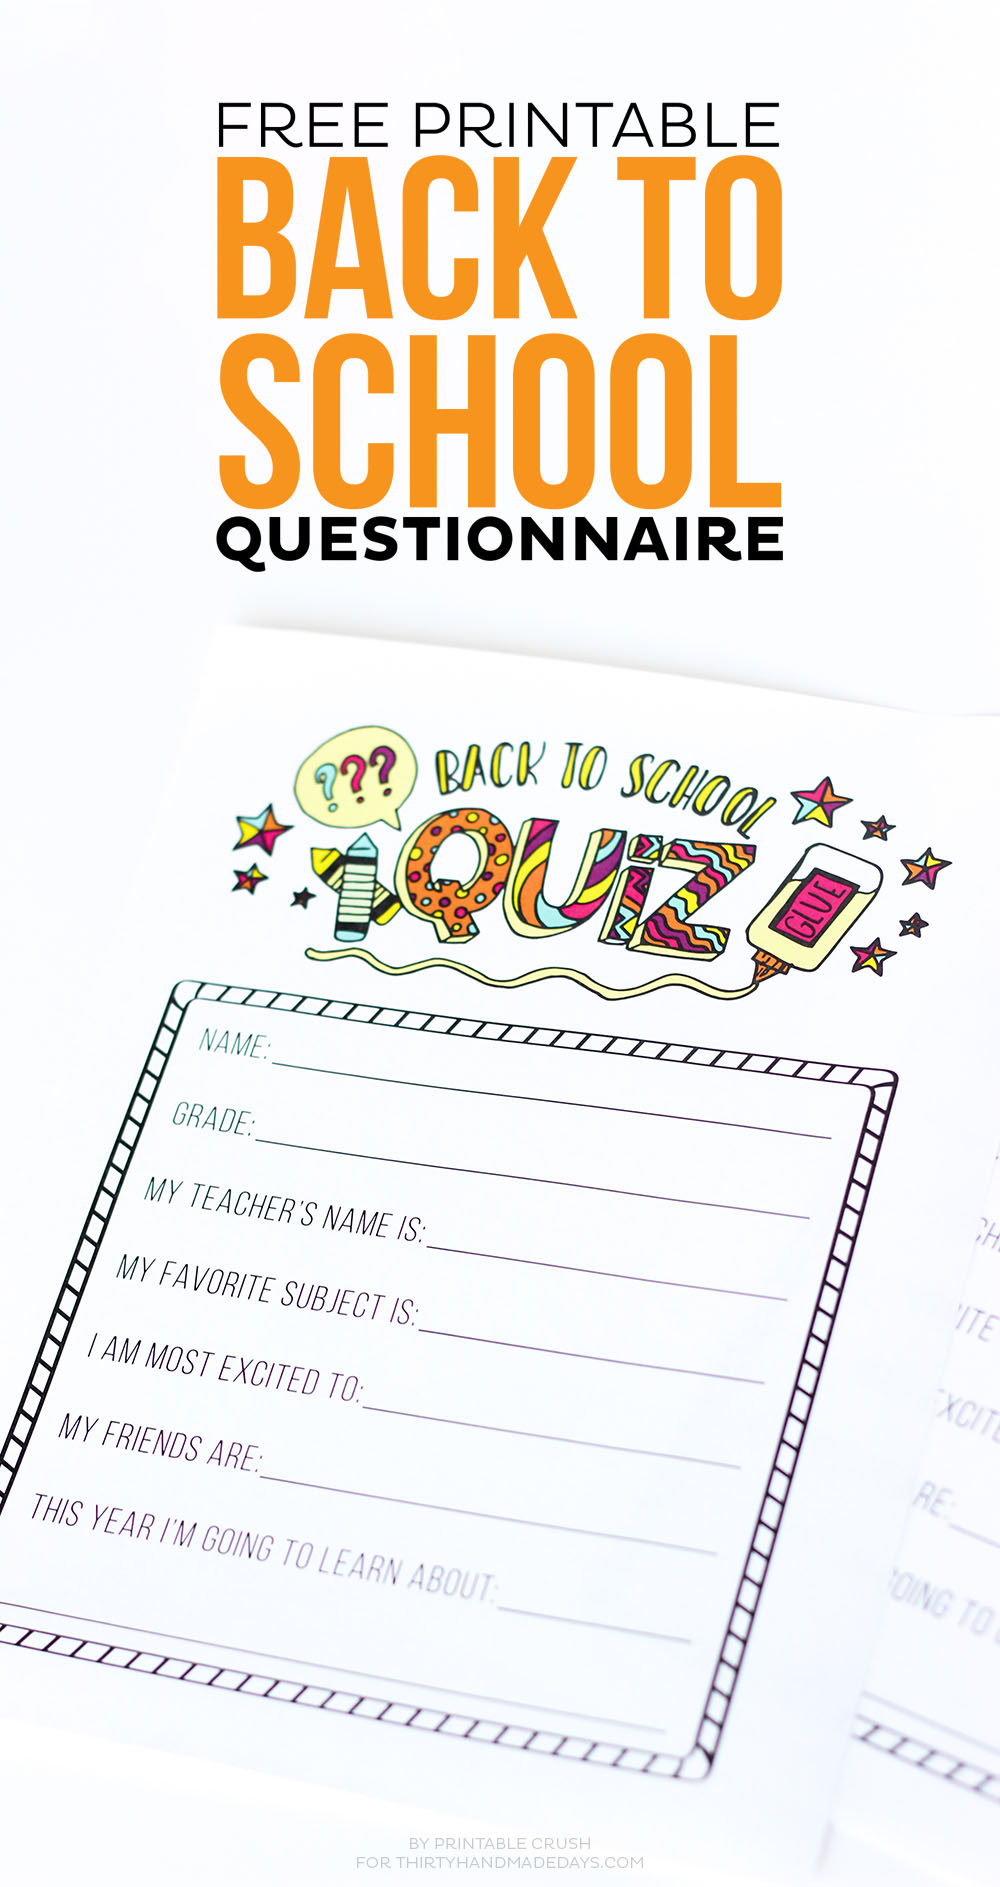 This FREE Printable Back to School Questionnaire is a great way to keep memories. Plus, it doubles as a coloring page so kids can be creative!